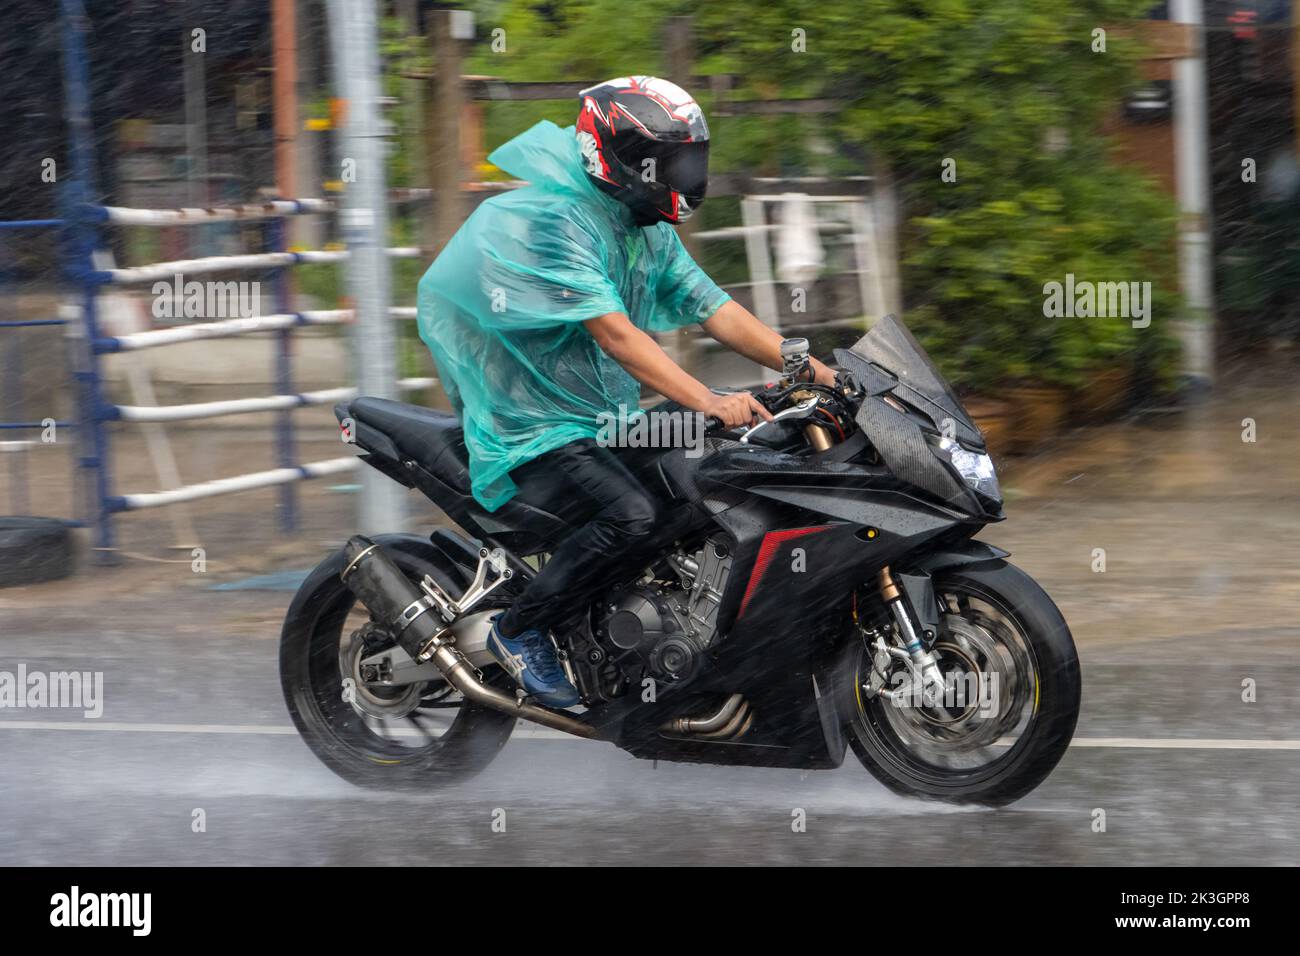 A man in a raincoat rides a motorcycle on the street in heavy rain Stock Photo